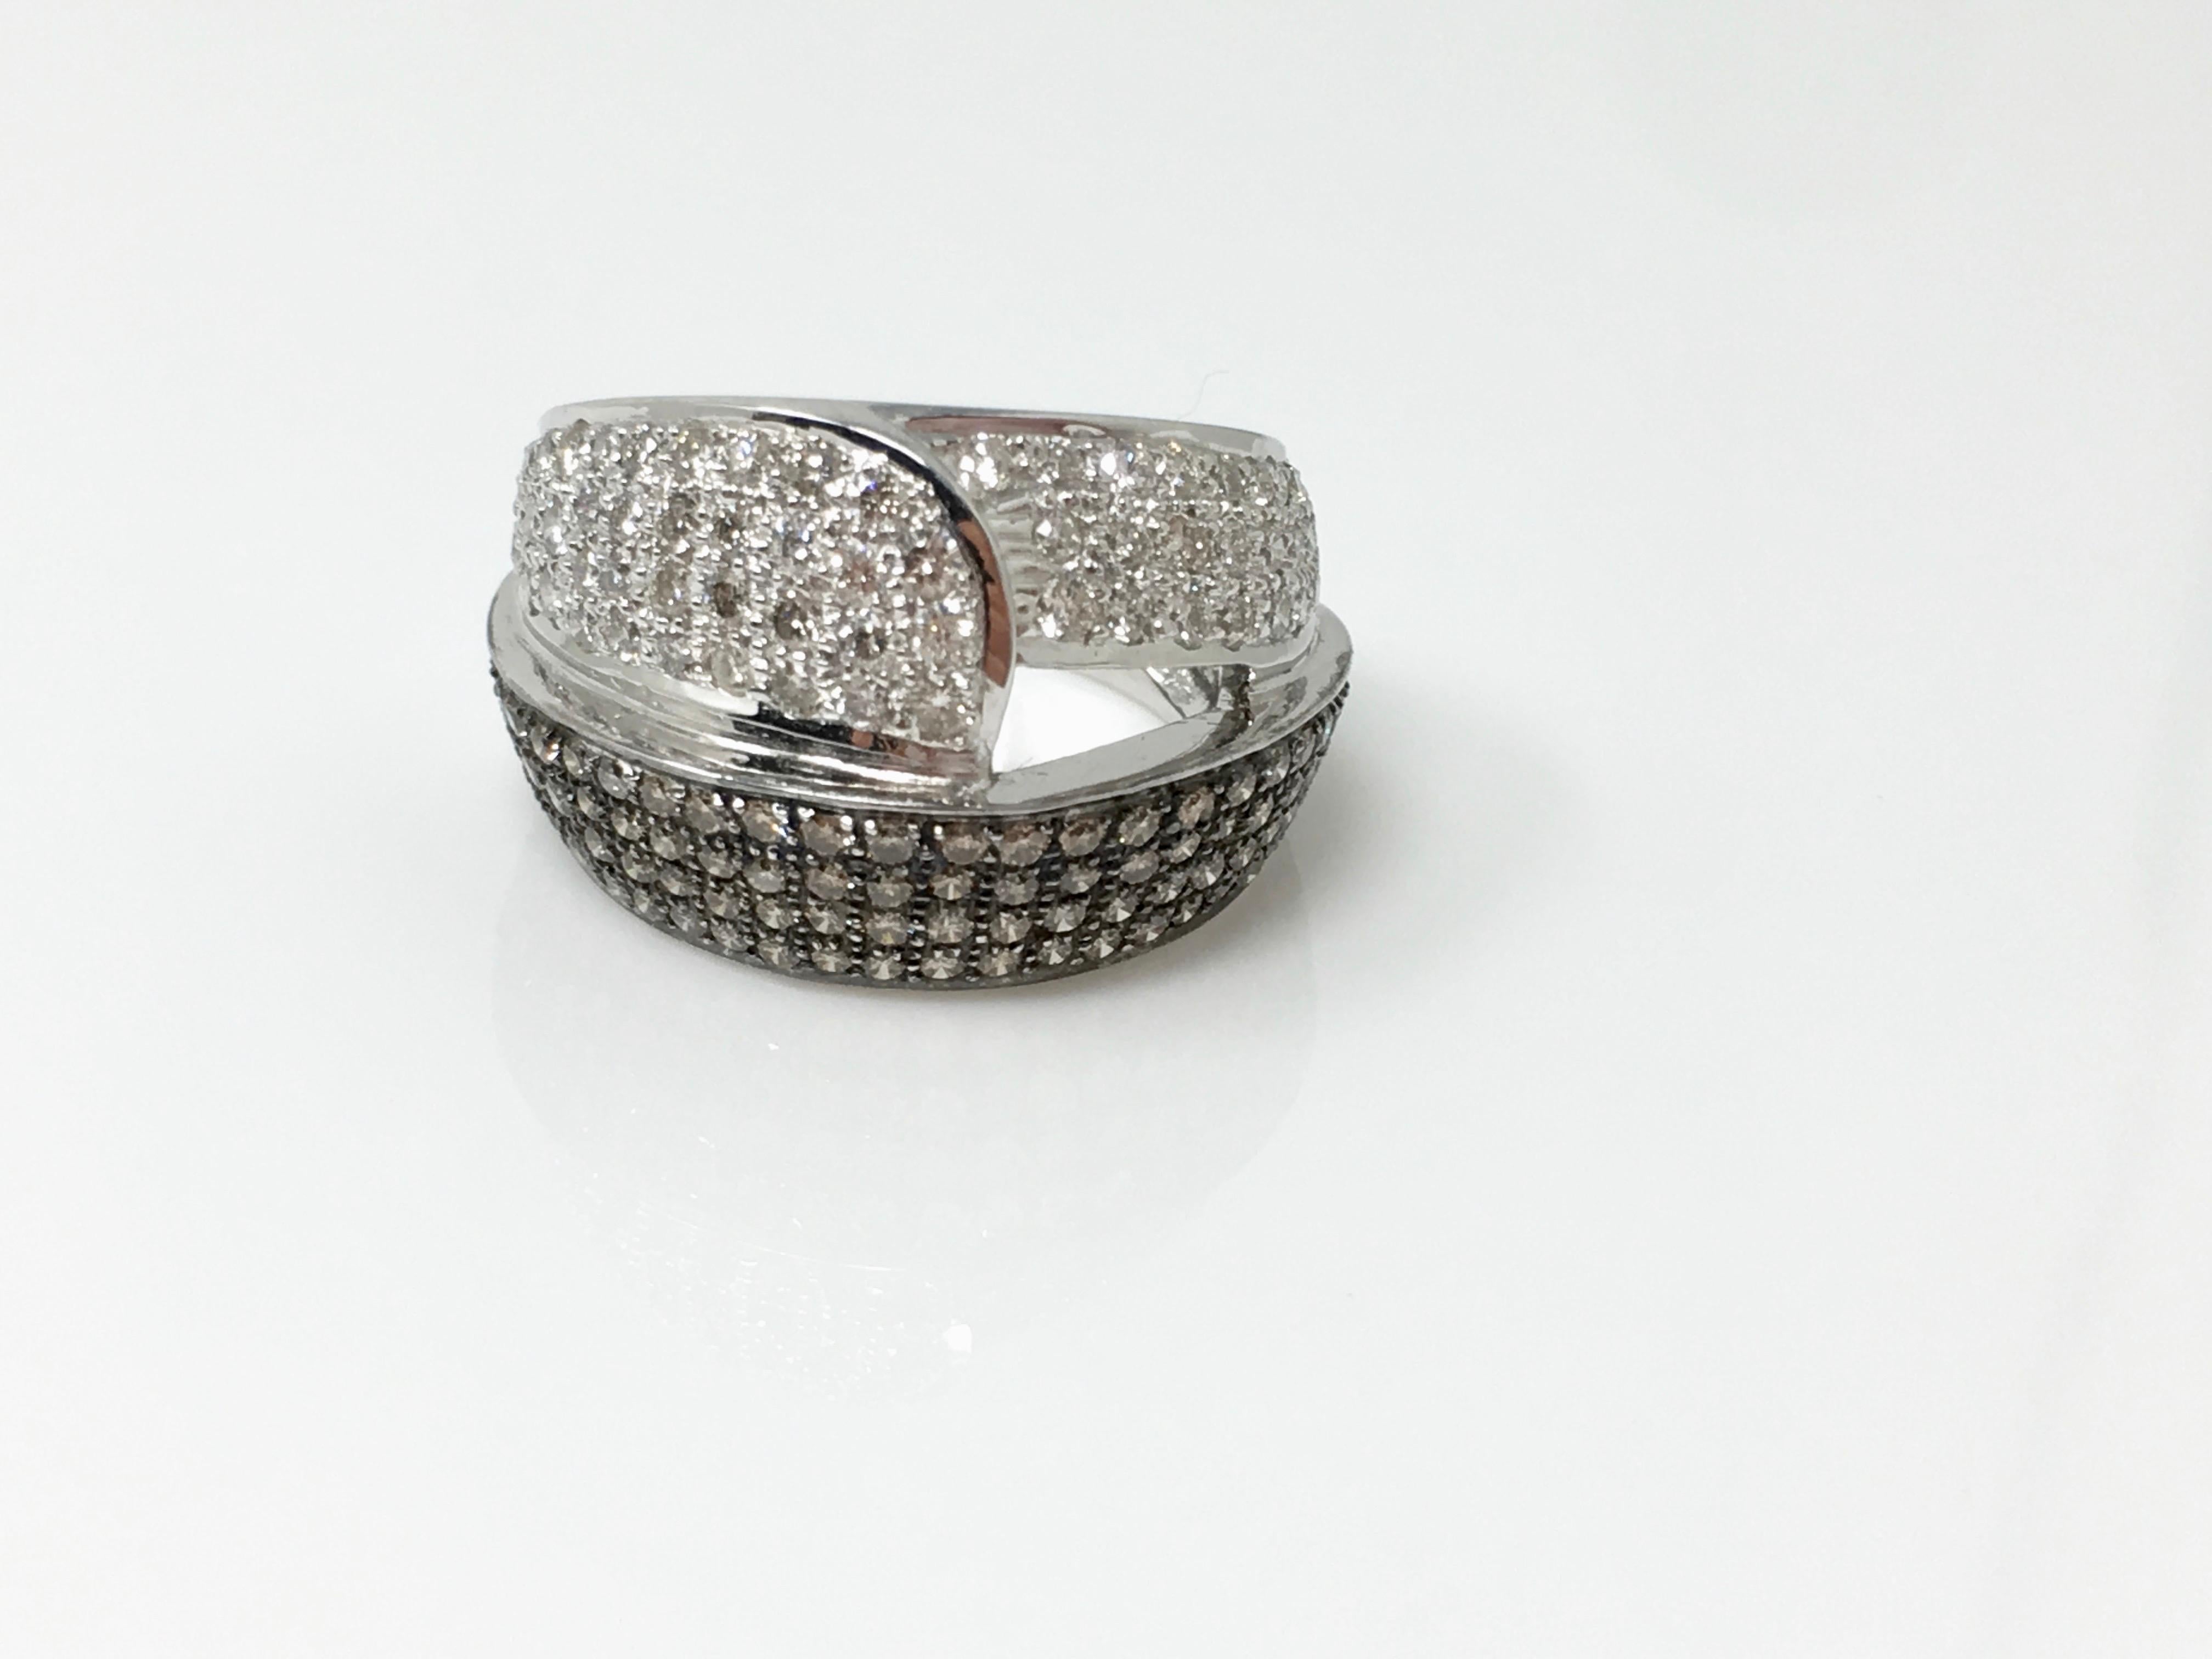 This beautifully handmade cocktail ring in 18k white gold features white round brilliant diamonds weighing 2.10 carat GH color and VS clarity and brown diamonds weighing 1.10 carat. The ring size is 6 . and can be resized. The center width of the